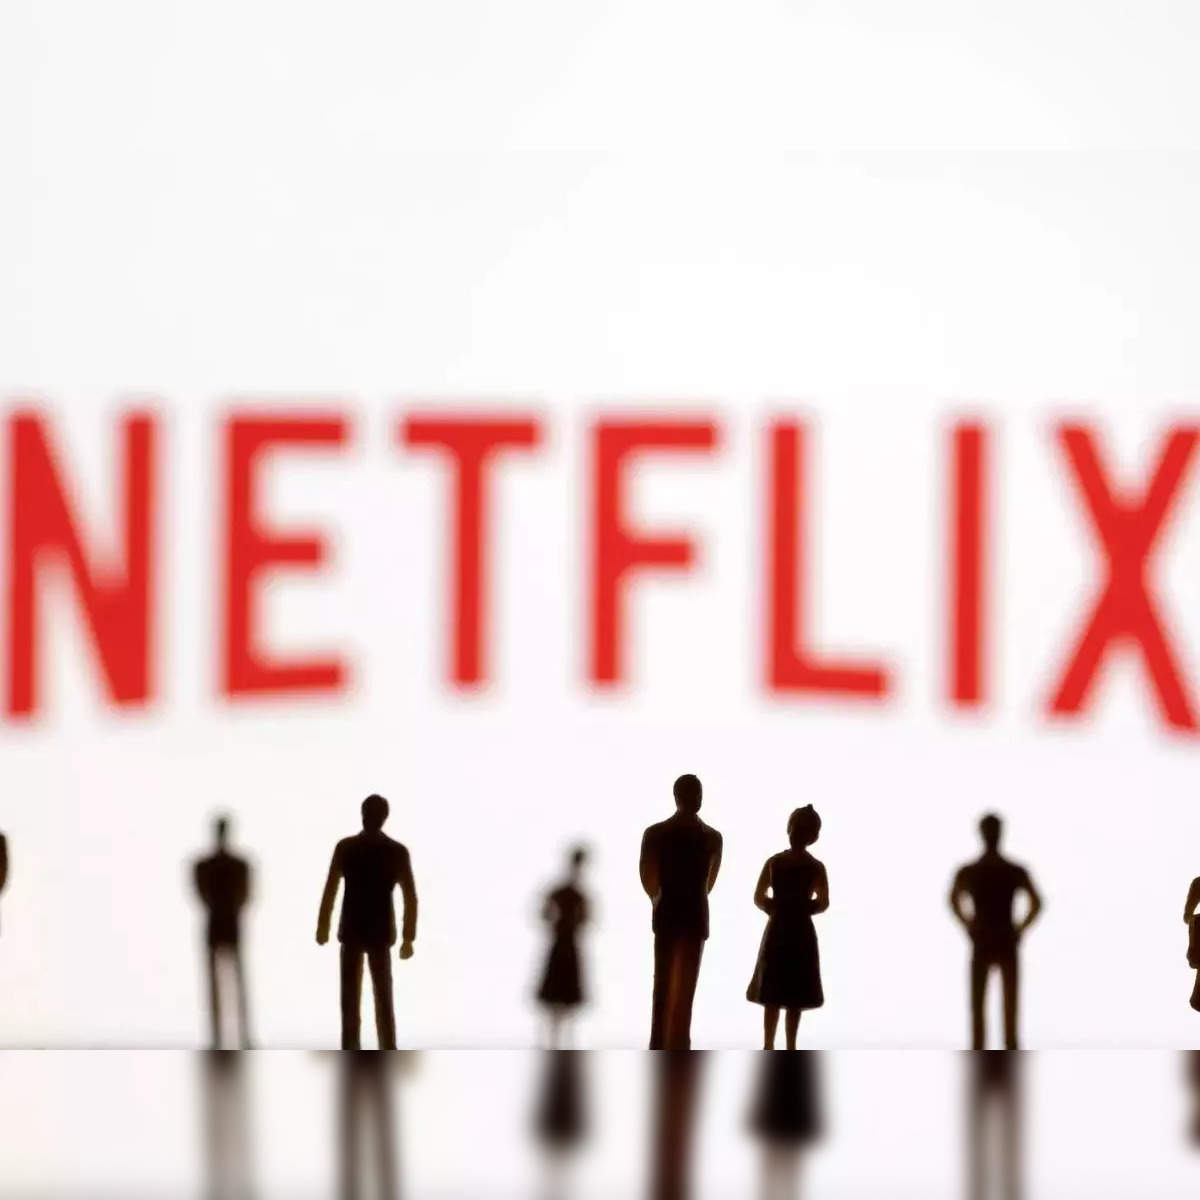 What's Coming to Netflix UK in August 2023 - What's on Netflix